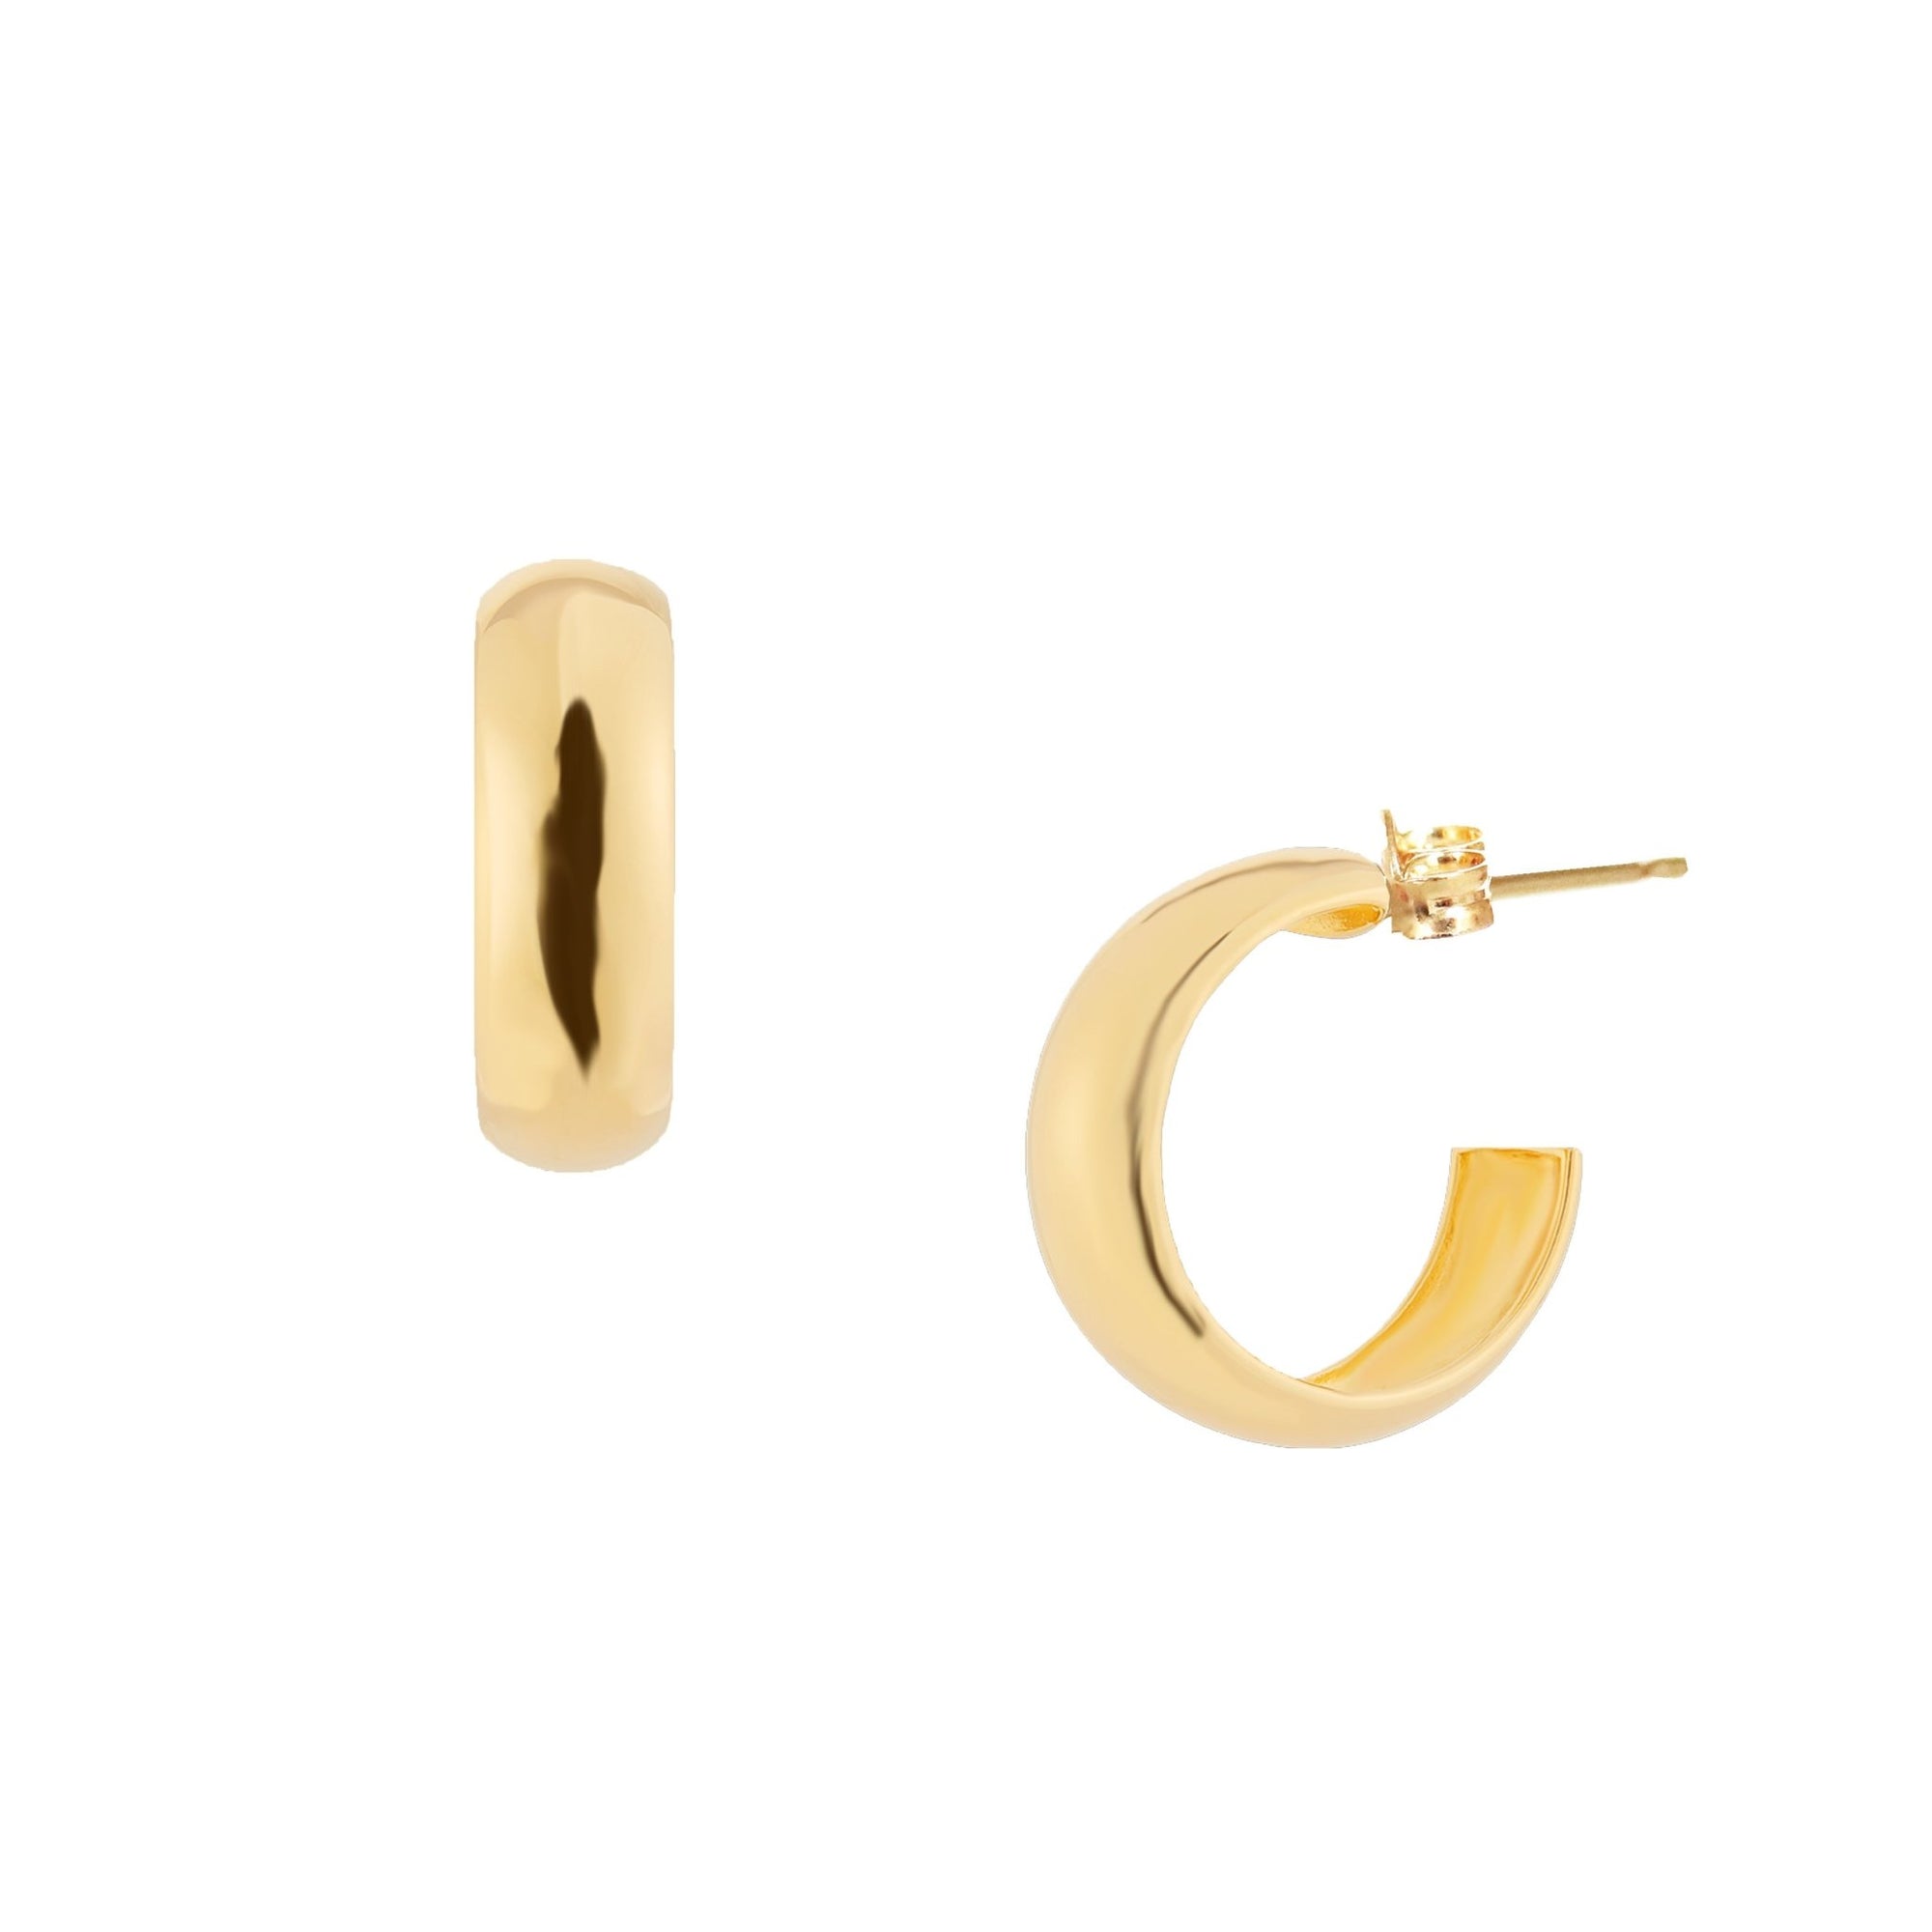 POISE HUGGIE HOOPS - GOLD - SO PRETTY CARA COTTER